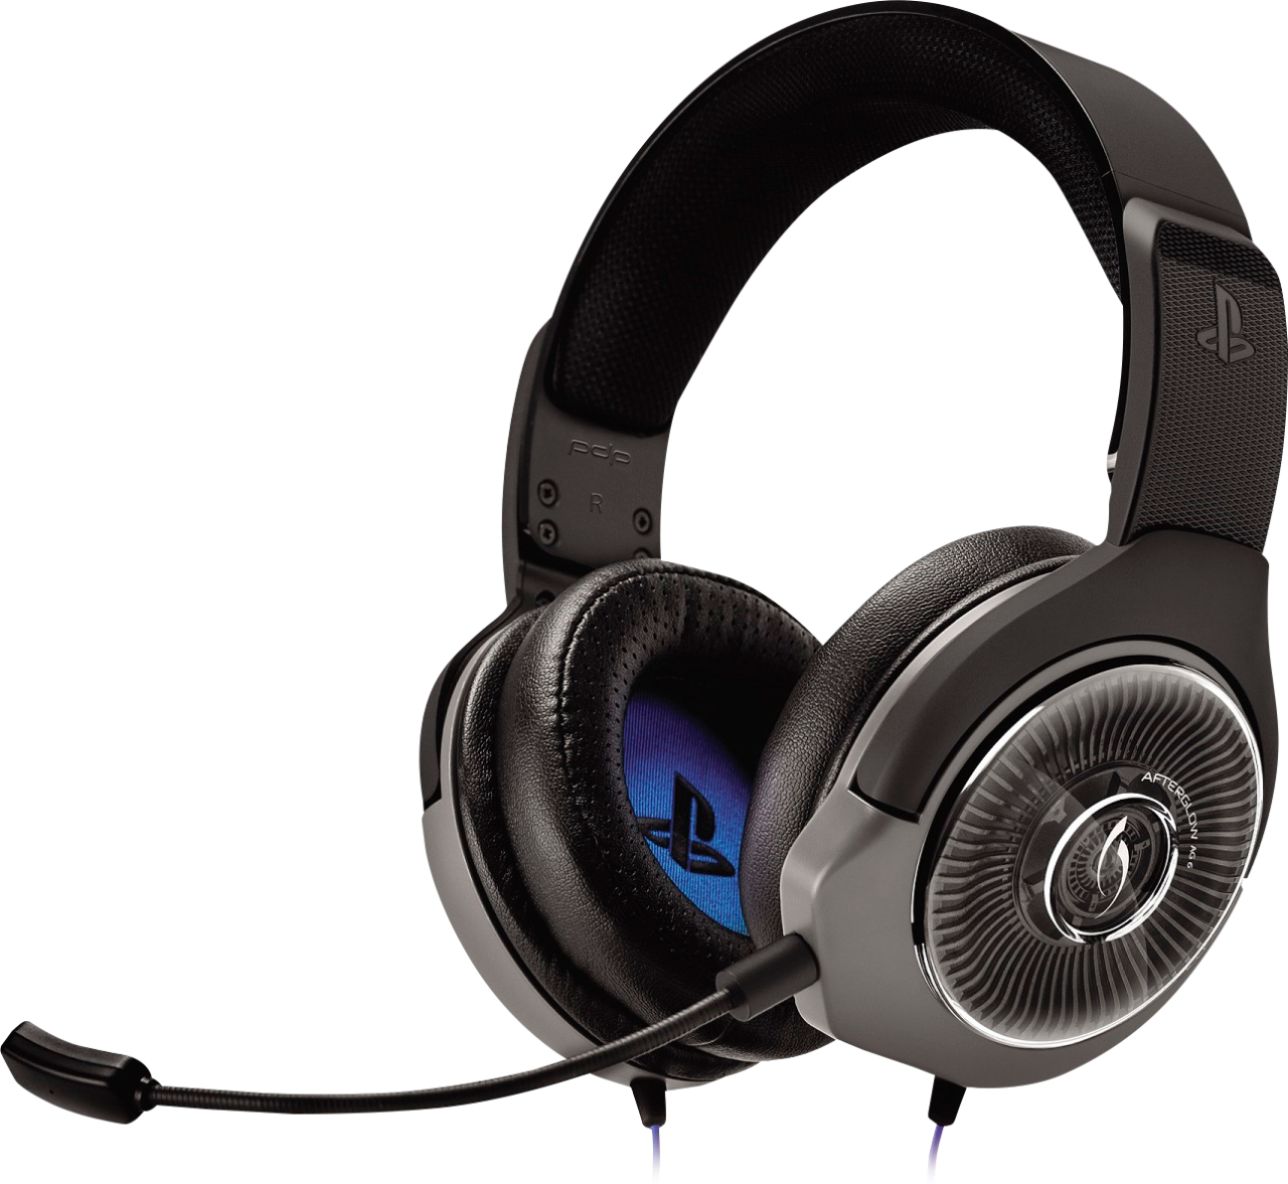 Afterglow AG 6 Wired Stereo Gaming Headset for PS4 Black ...